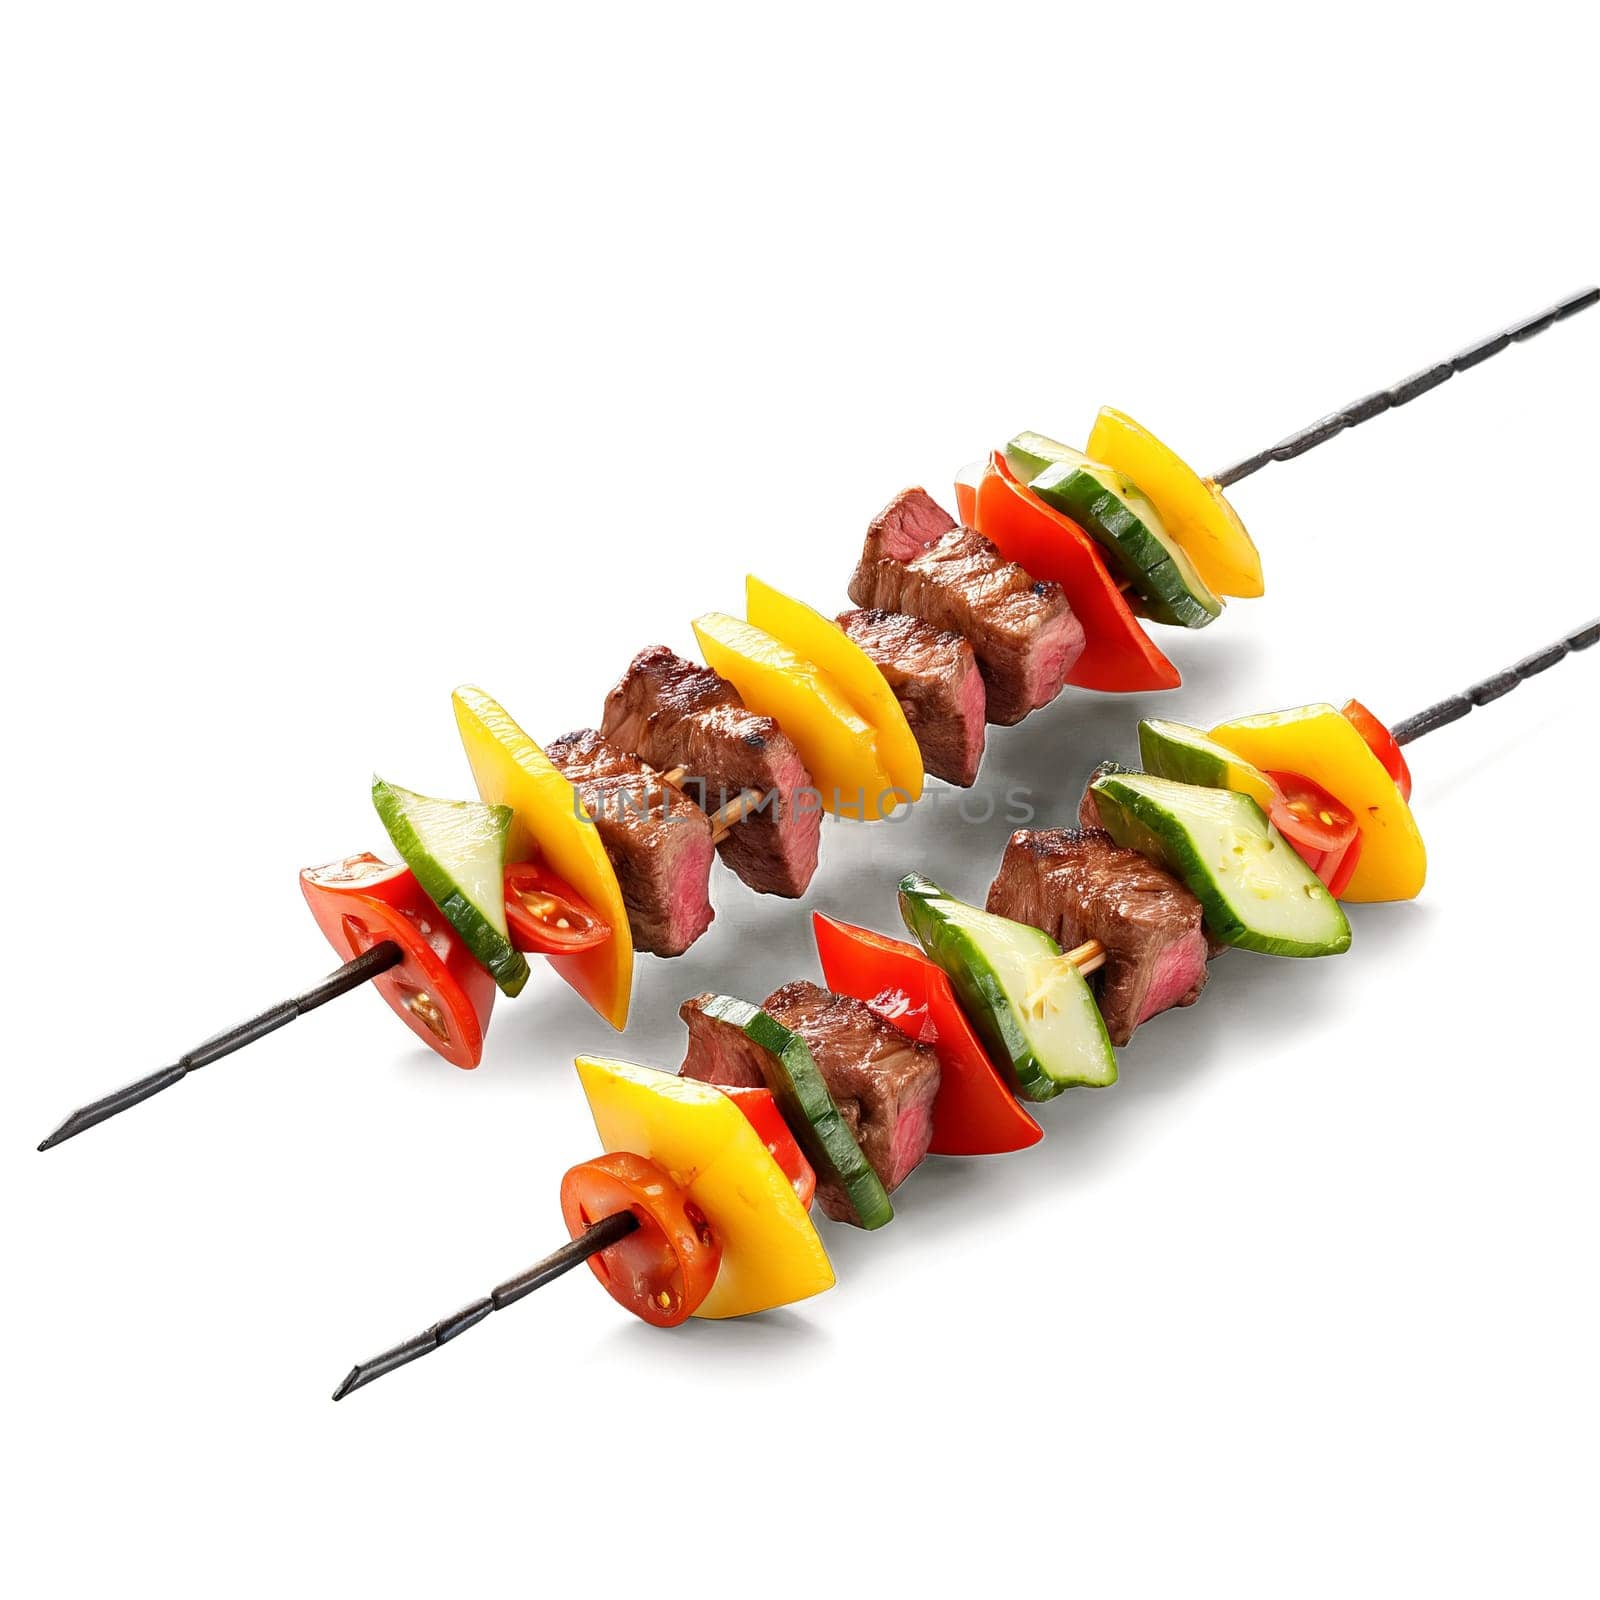 Steak kebabs marinated beef cubes and vegetable chunks on skewers isolated on transparent background Food. Food isolated on transparent background.